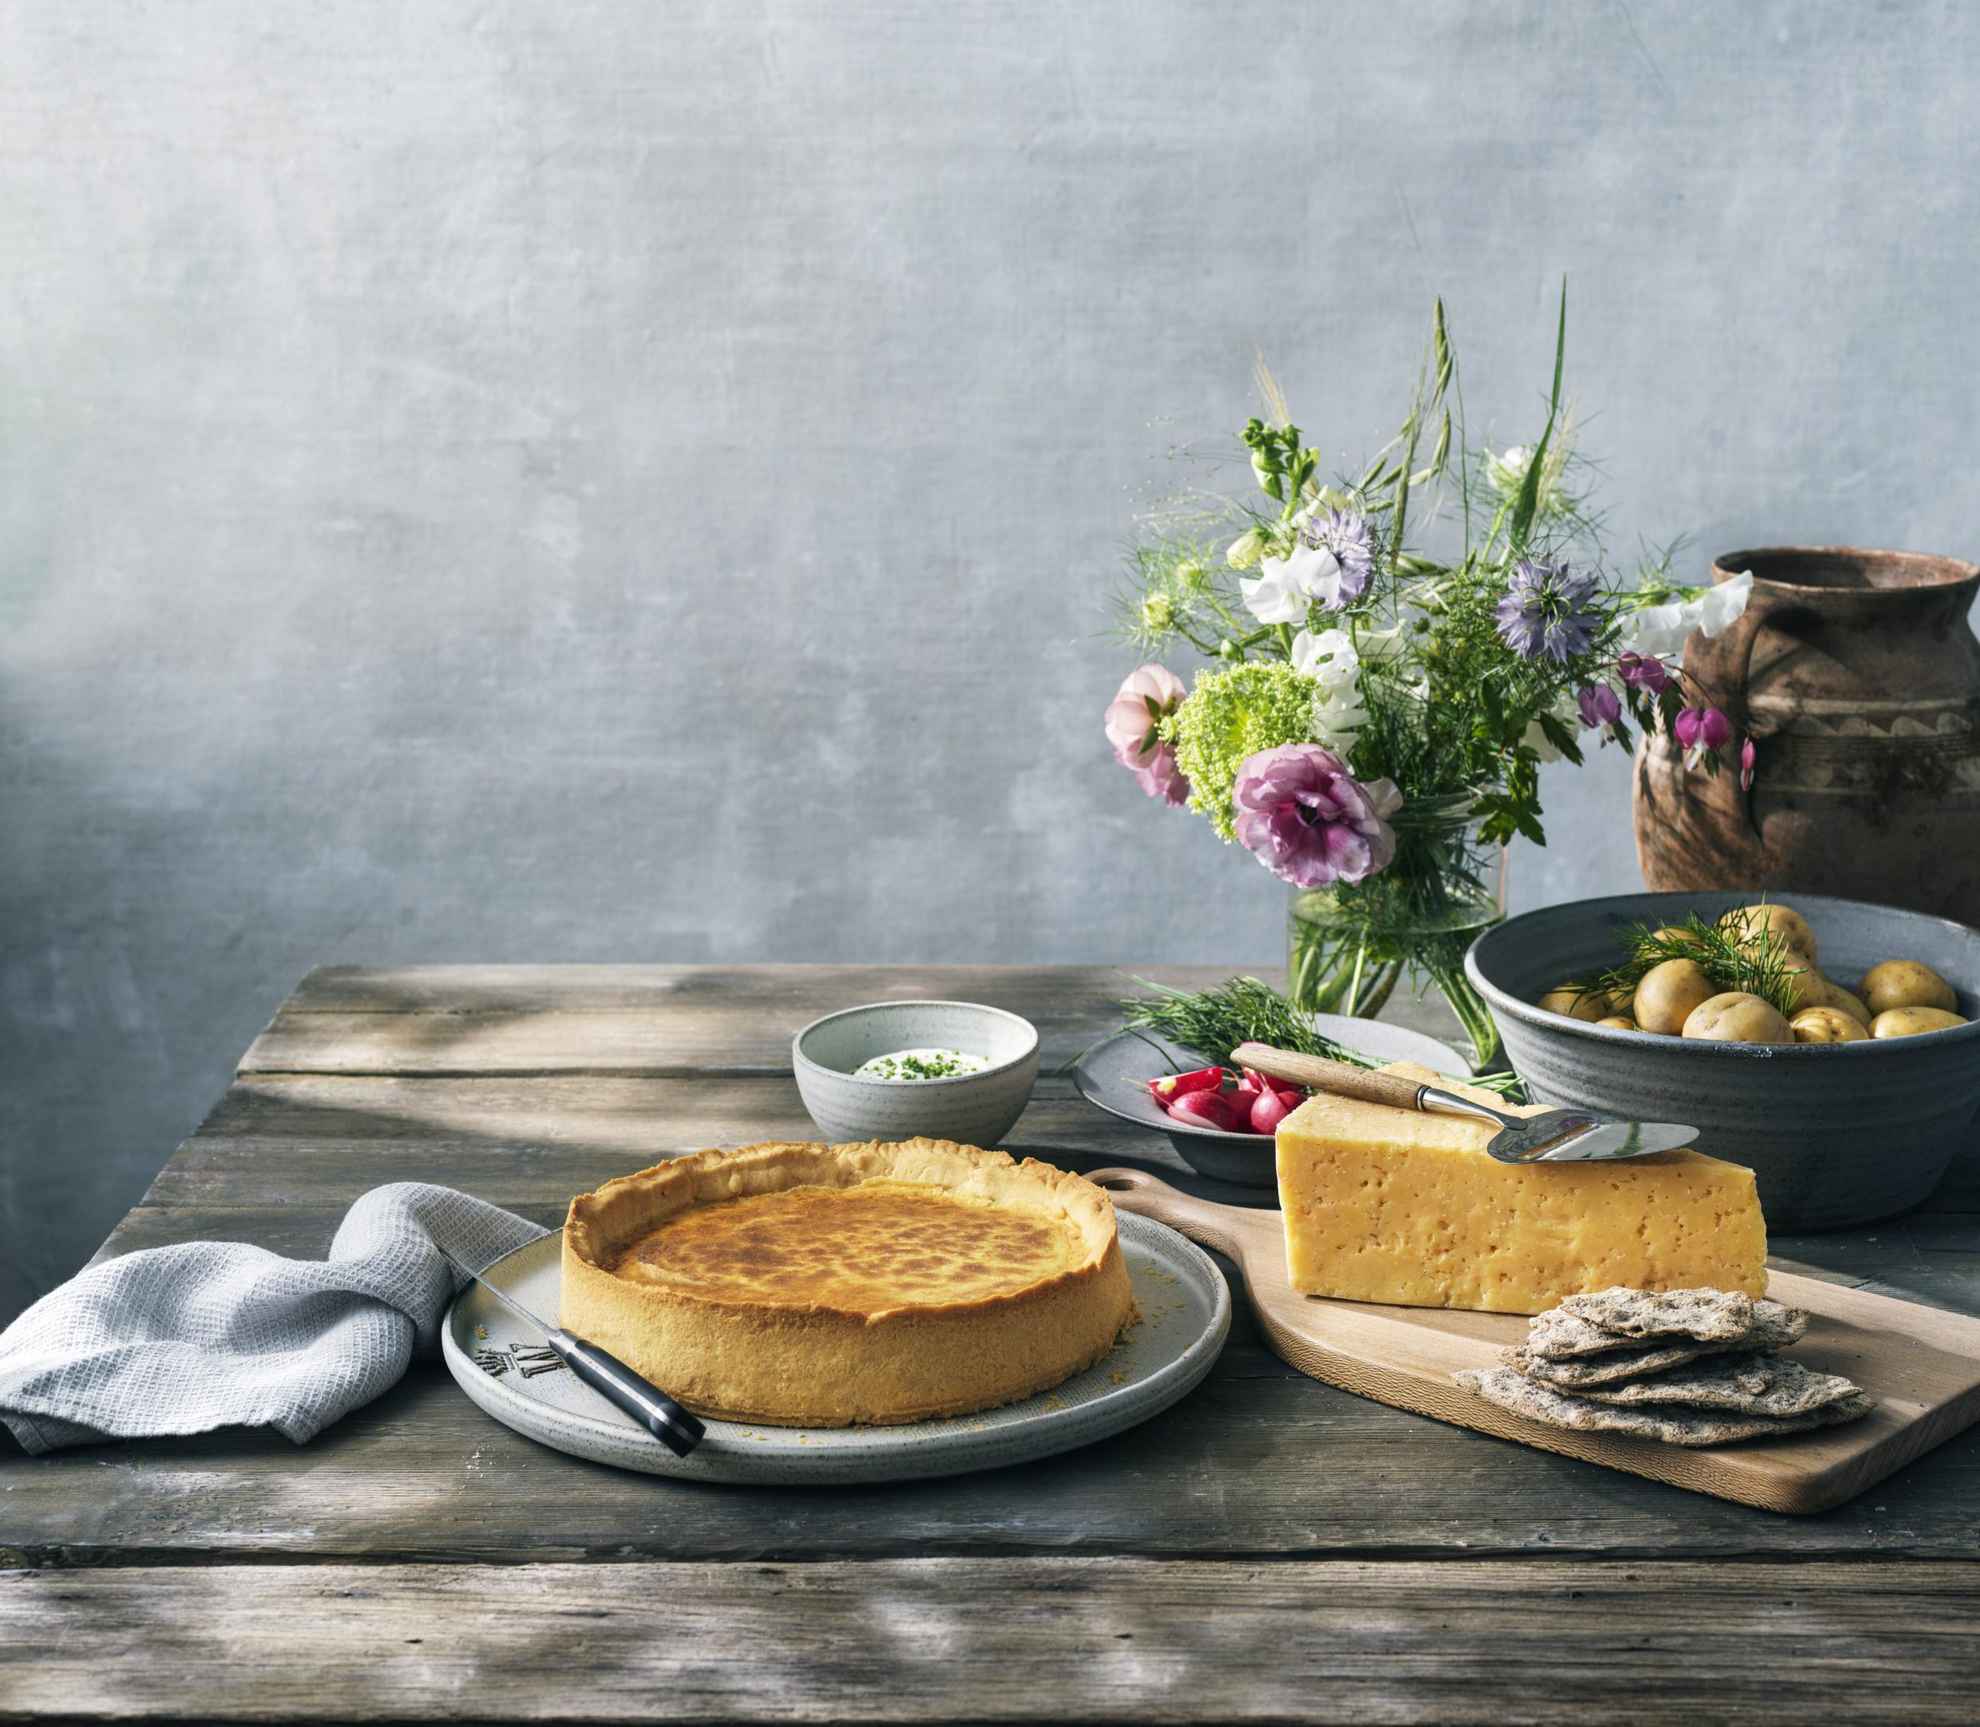 A wooden table with Västerbottenpaj quiche, Västerbotten cheese, a bowl of potatoes and a vase of flowers.